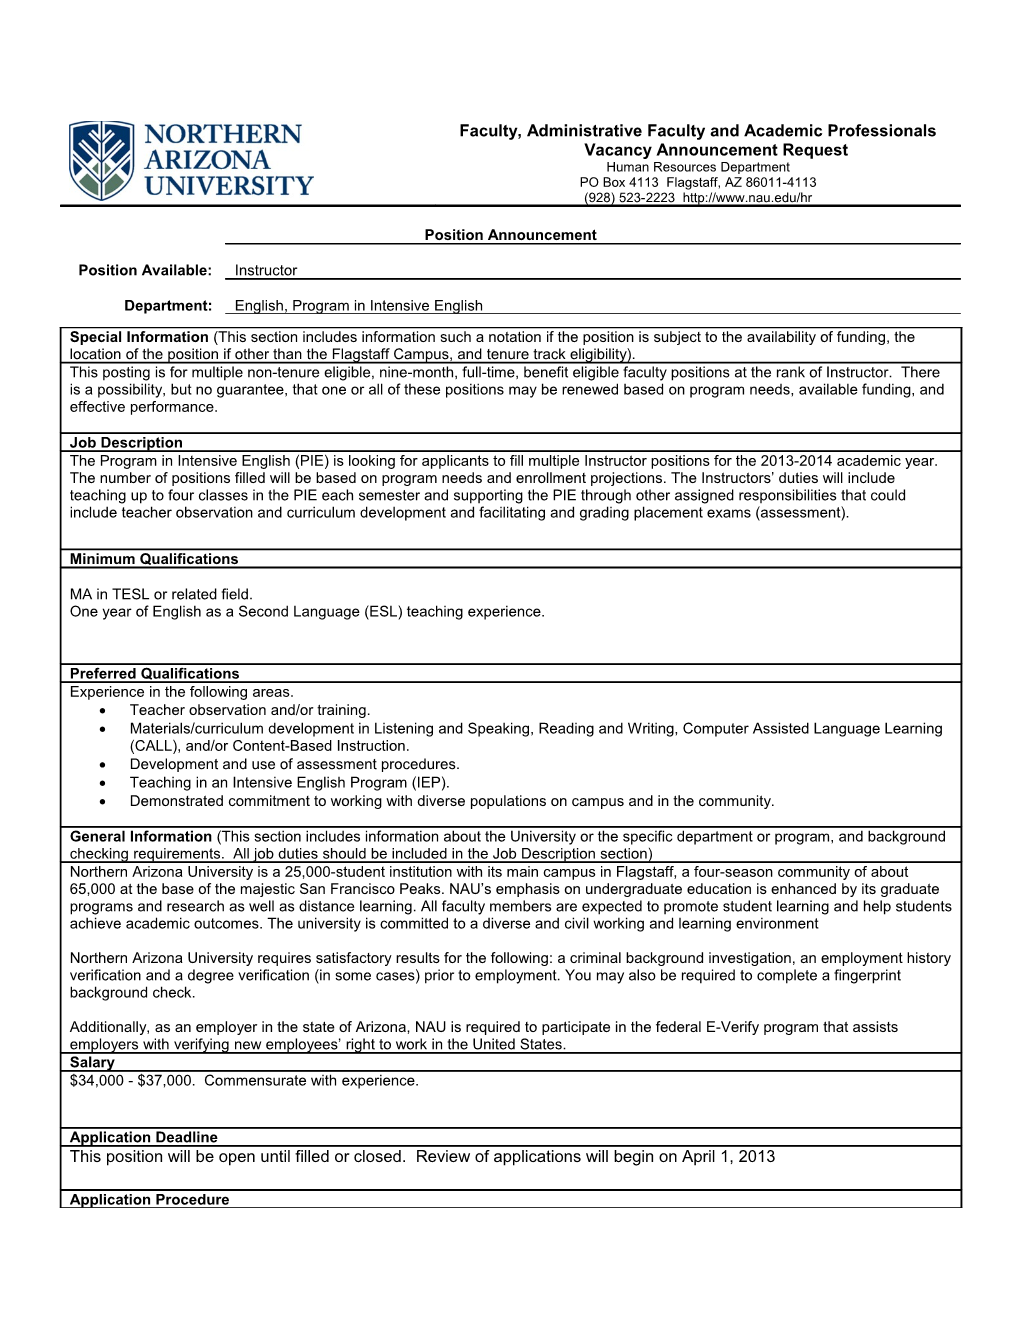 Faculty, Administrative Faculty and Academic Professionals Vacancy Announcement Request